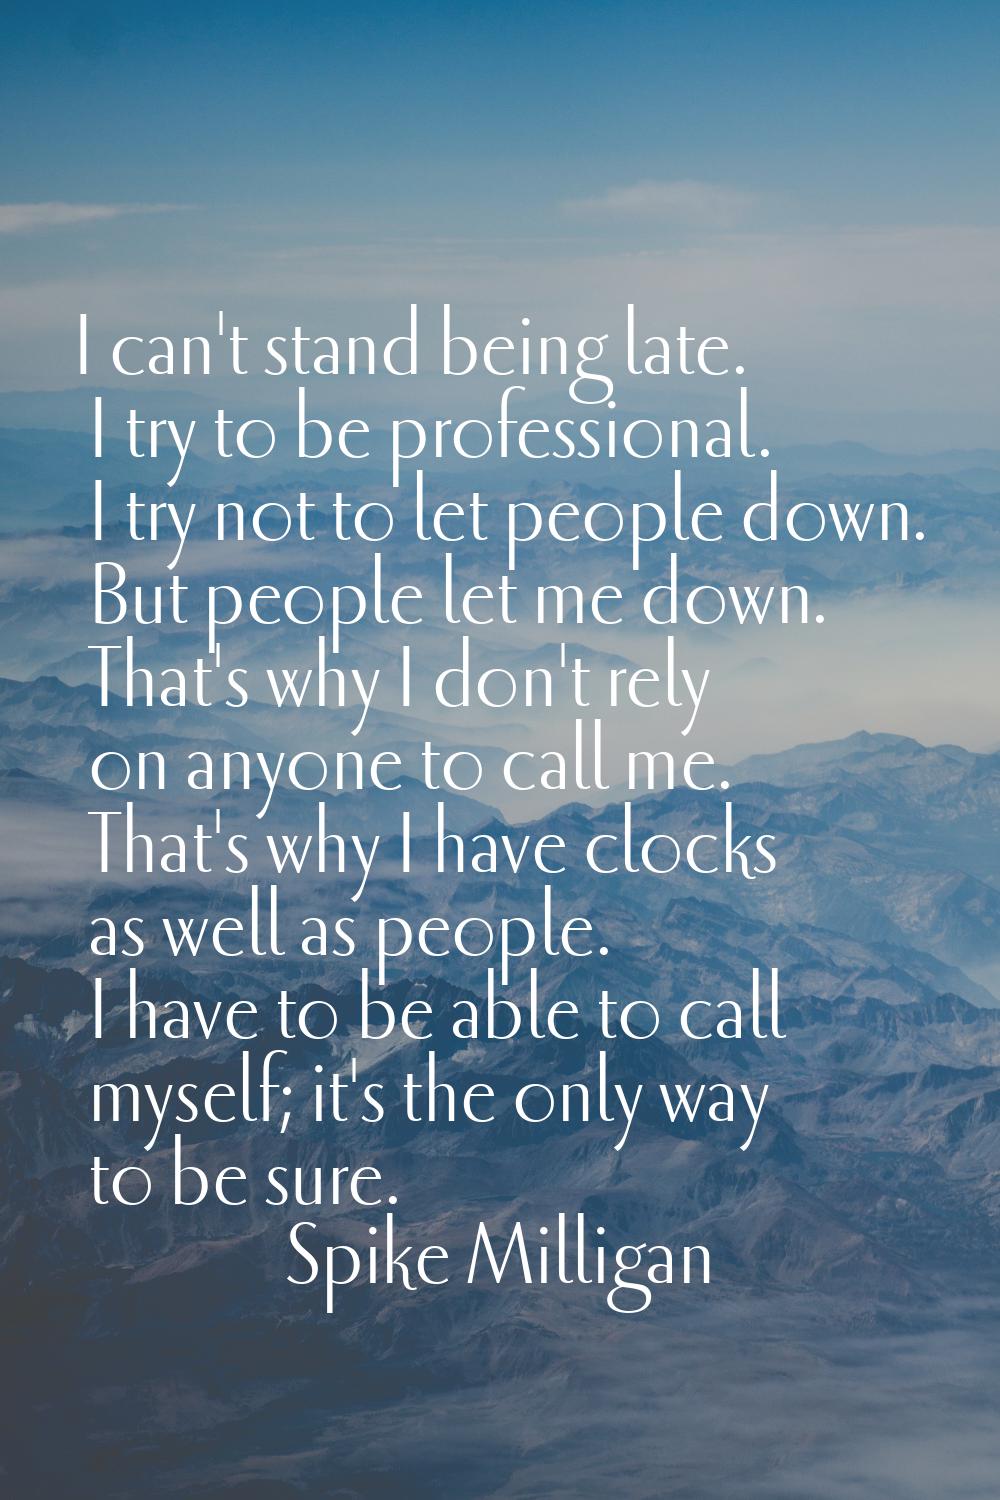 I can't stand being late. I try to be professional. I try not to let people down. But people let me